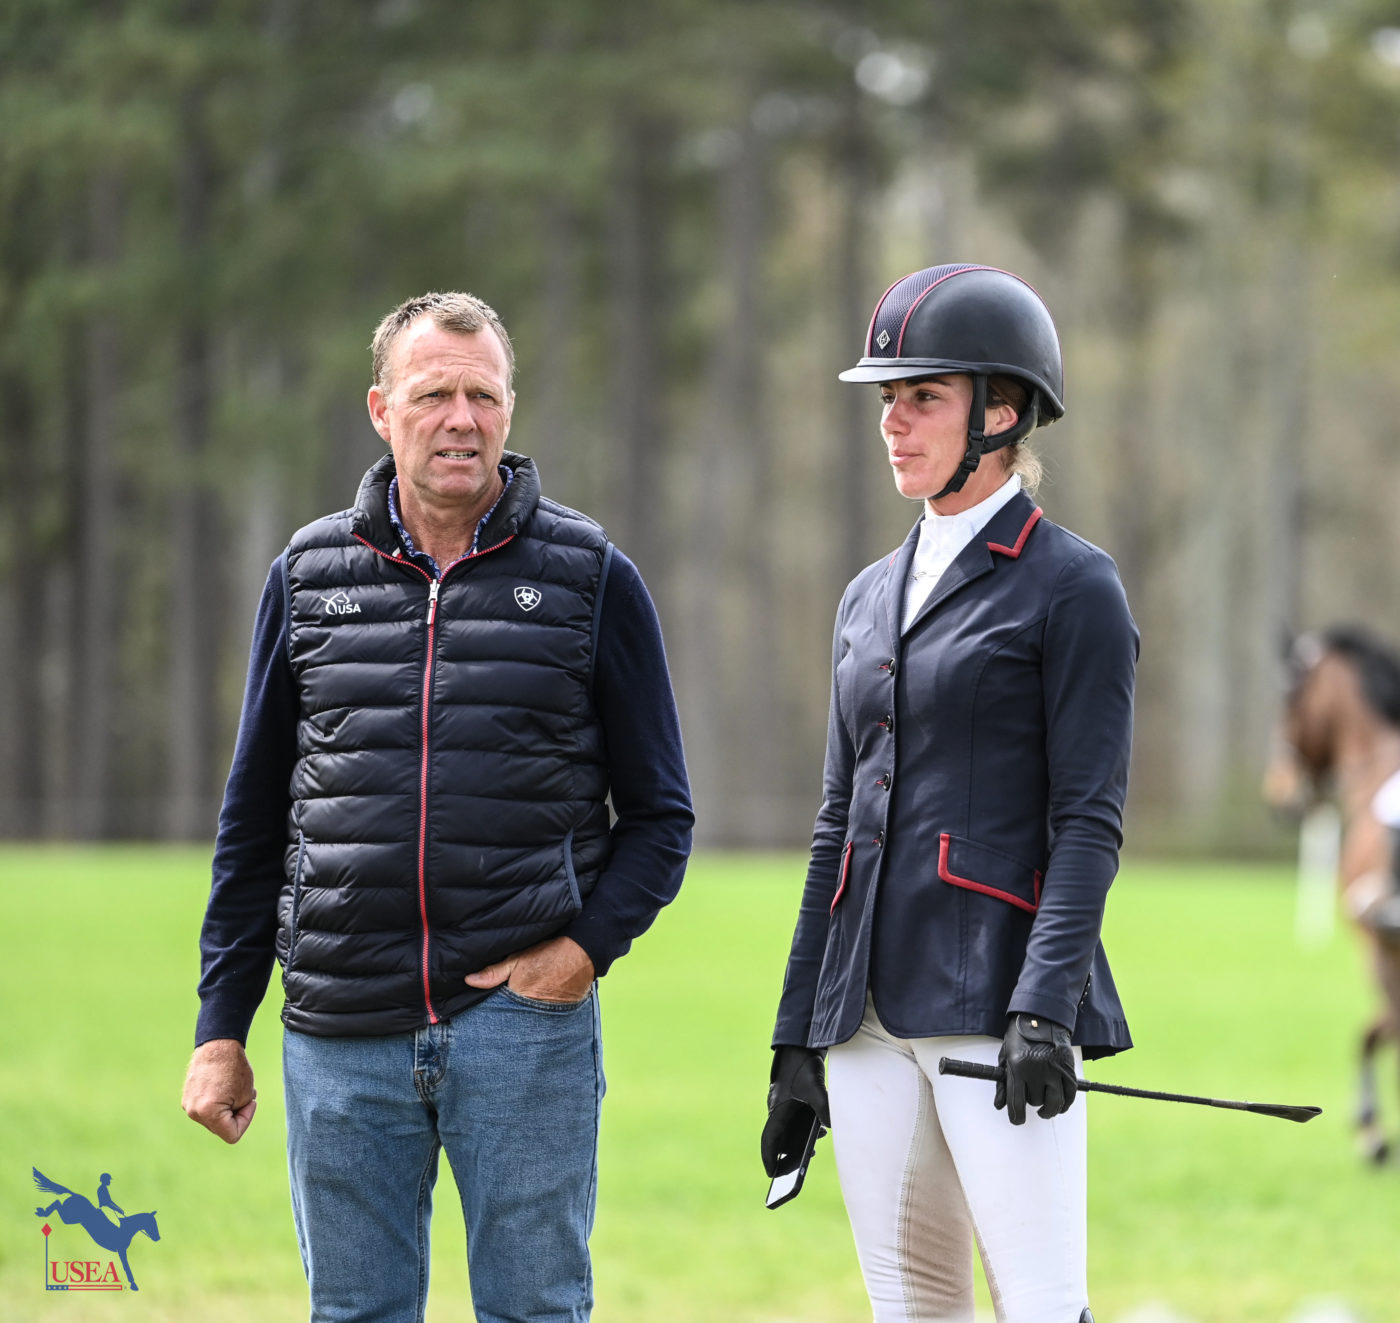 Nothing like a little pre-ride pep talk. Ariel Grald and U.S. team show jumping coach Peter Wylde. USEA/Lindsay Berreth photo